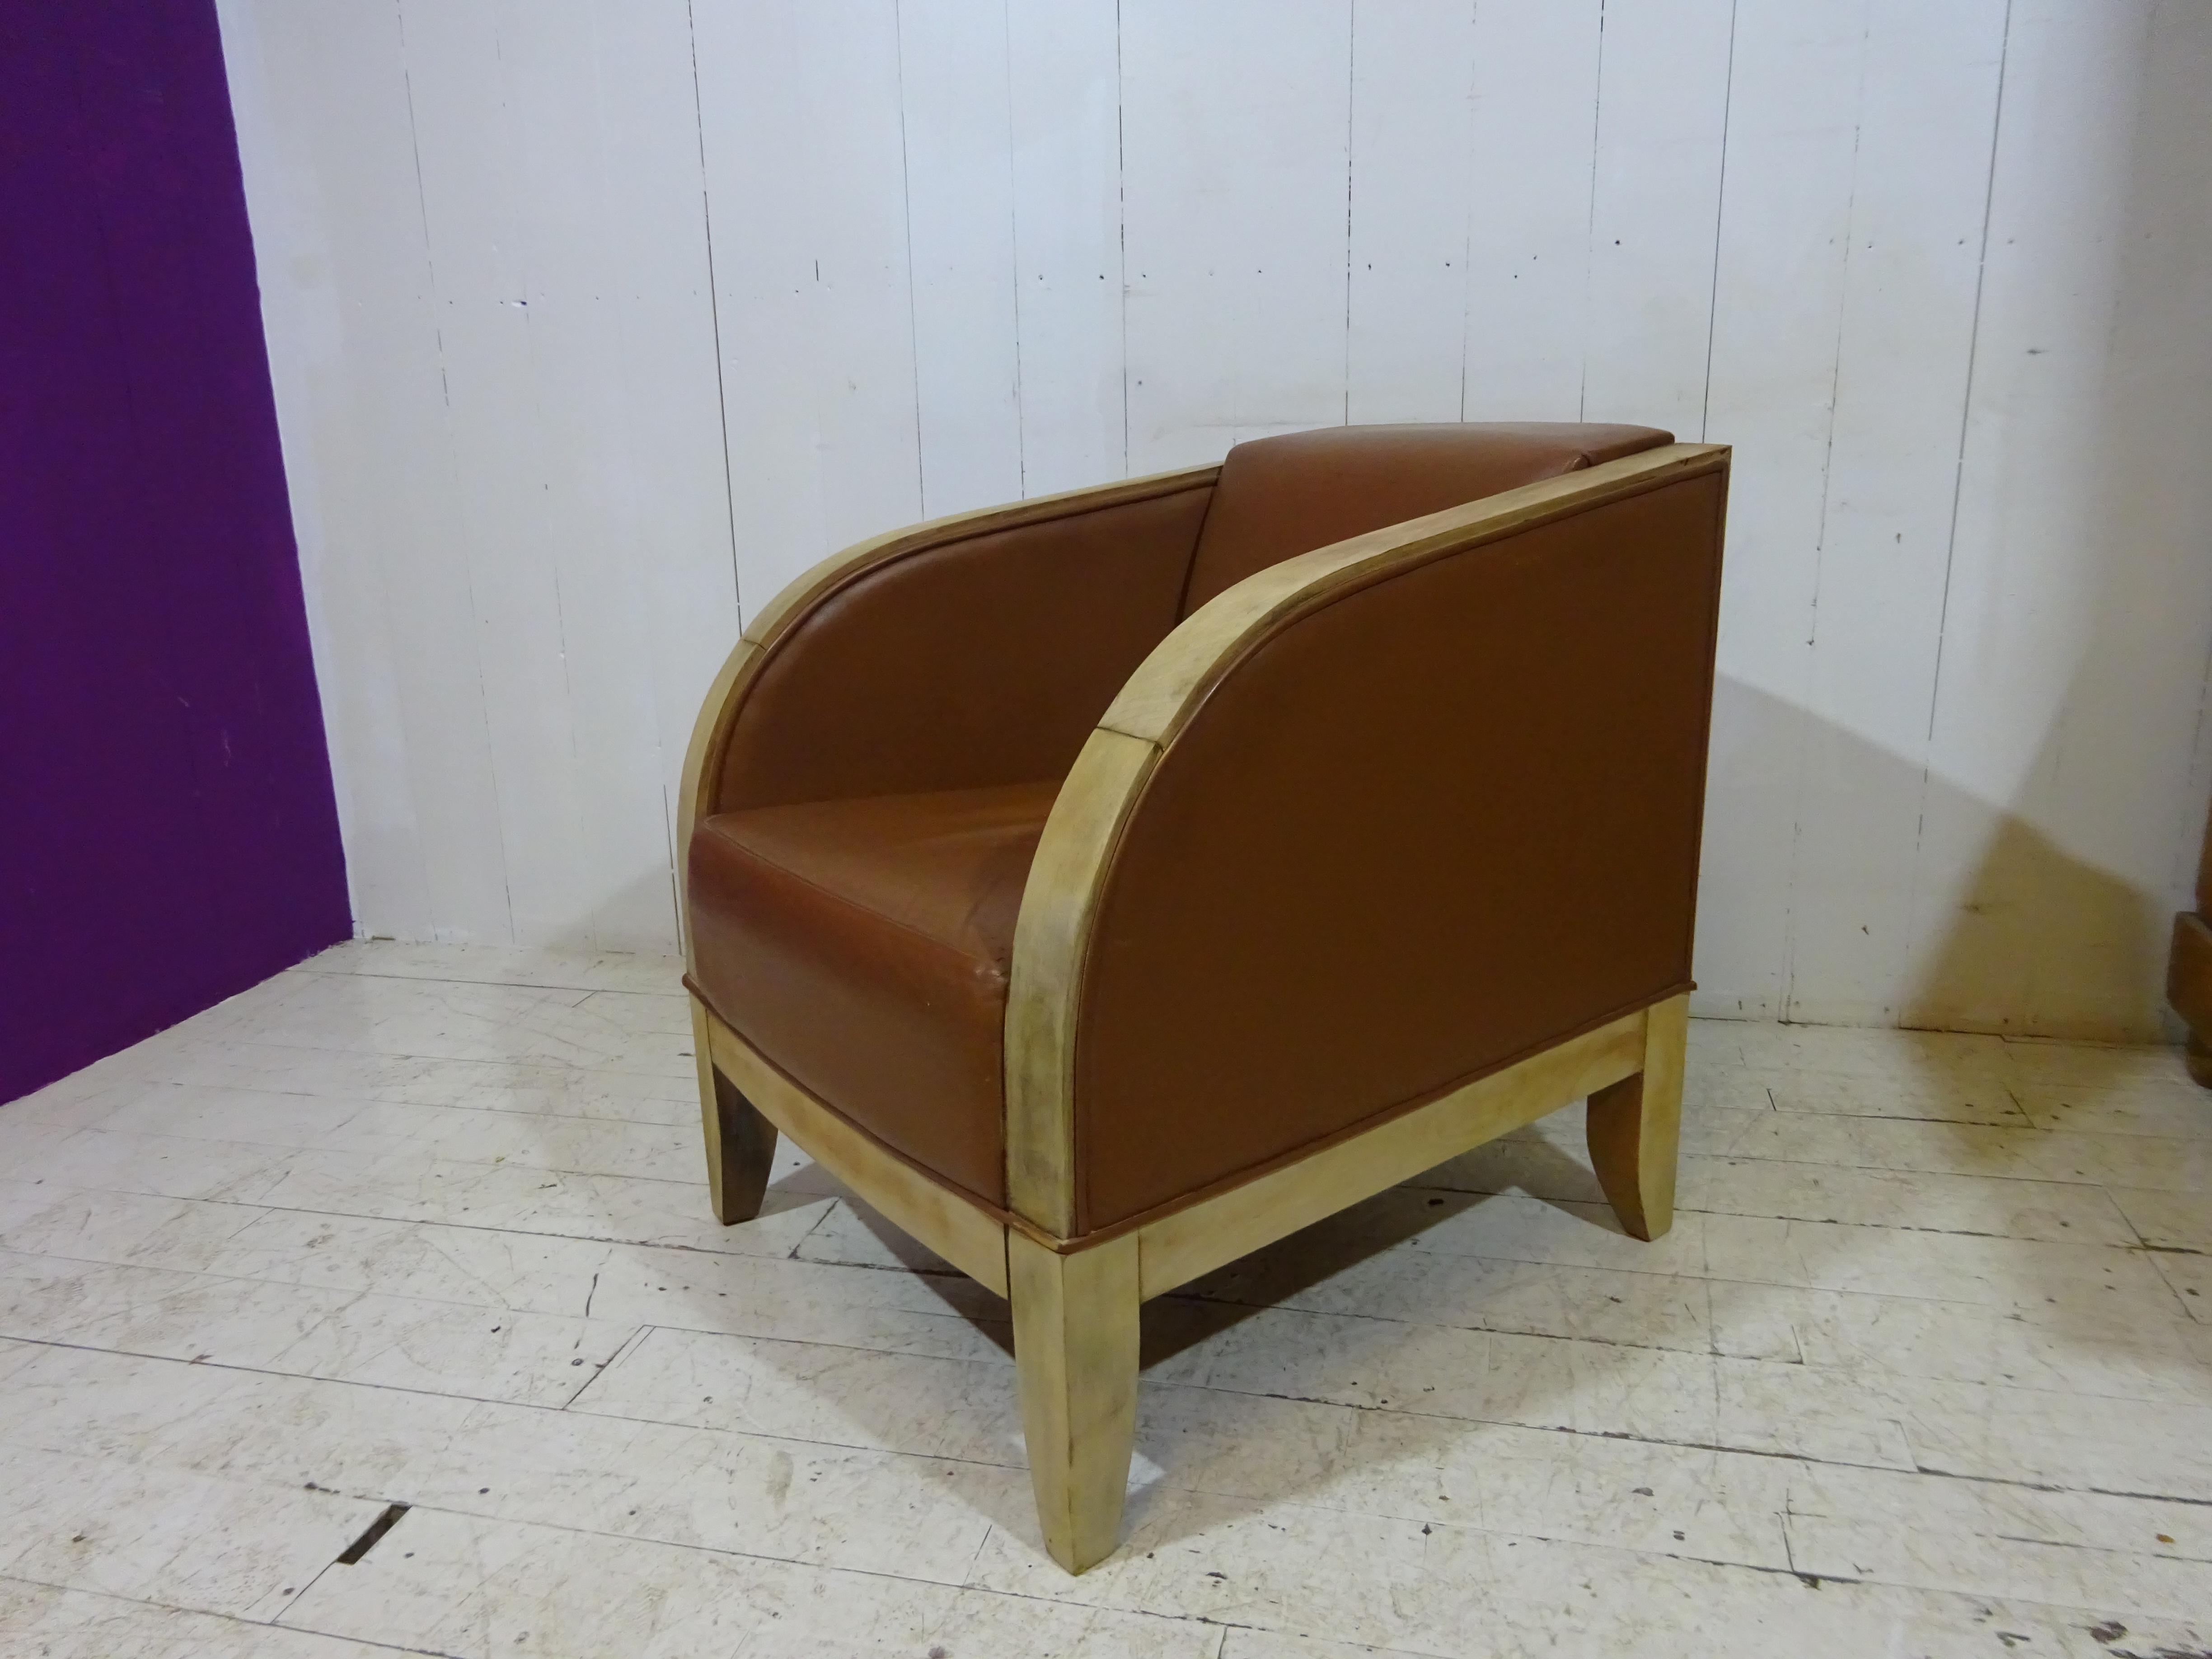 Art Deco Inspired Tan Leather Lounge Chair In Distressed Condition For Sale In Tarleton, GB